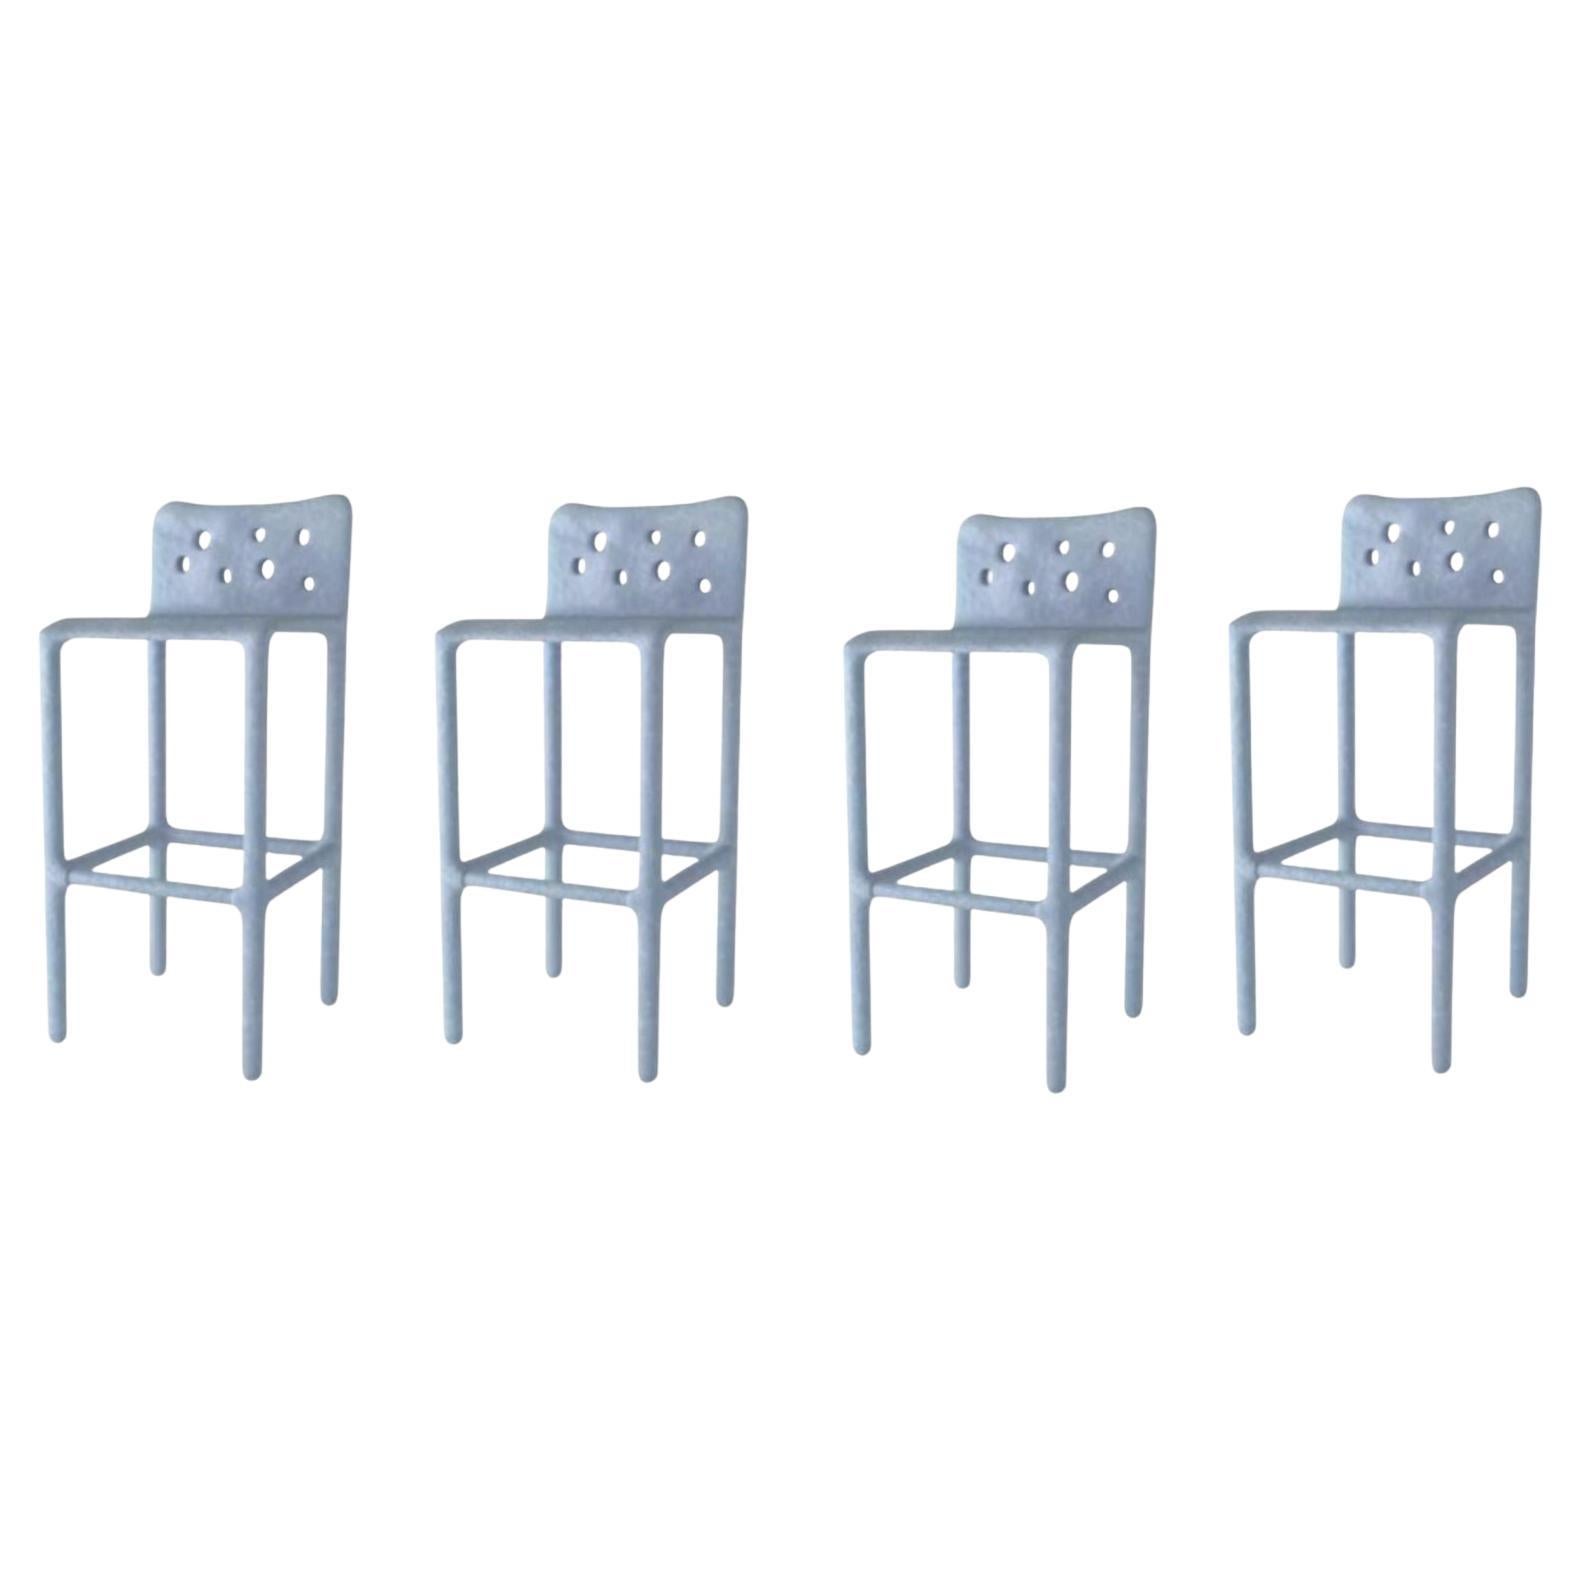 Set of 4 Sky Blue Sculpted Contemporary Chairs by Faina